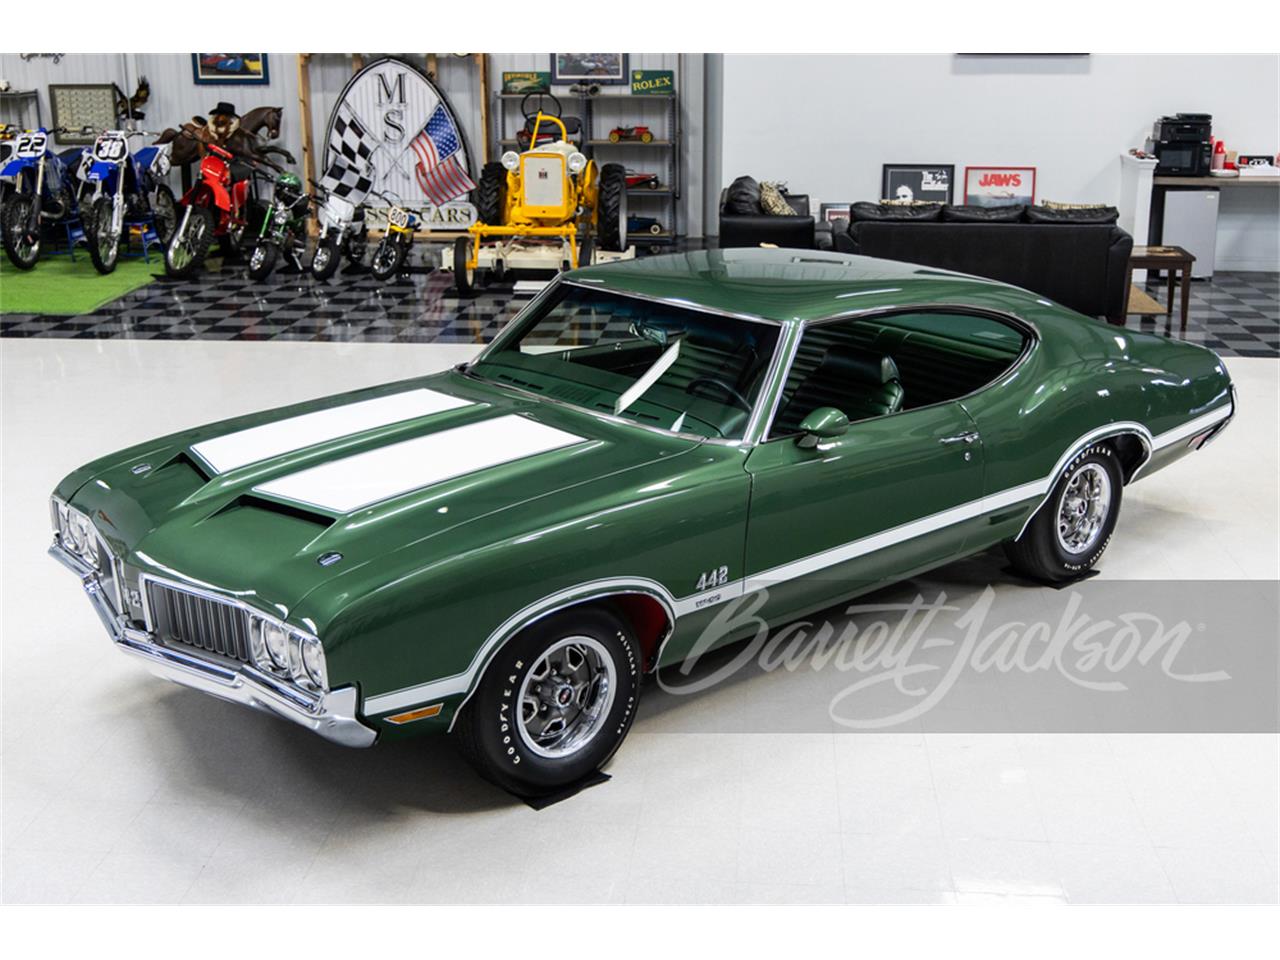 For Sale at Auction: 1970 Oldsmobile 442 in Scottsdale, Arizona for sale in Scottsdale, AZ